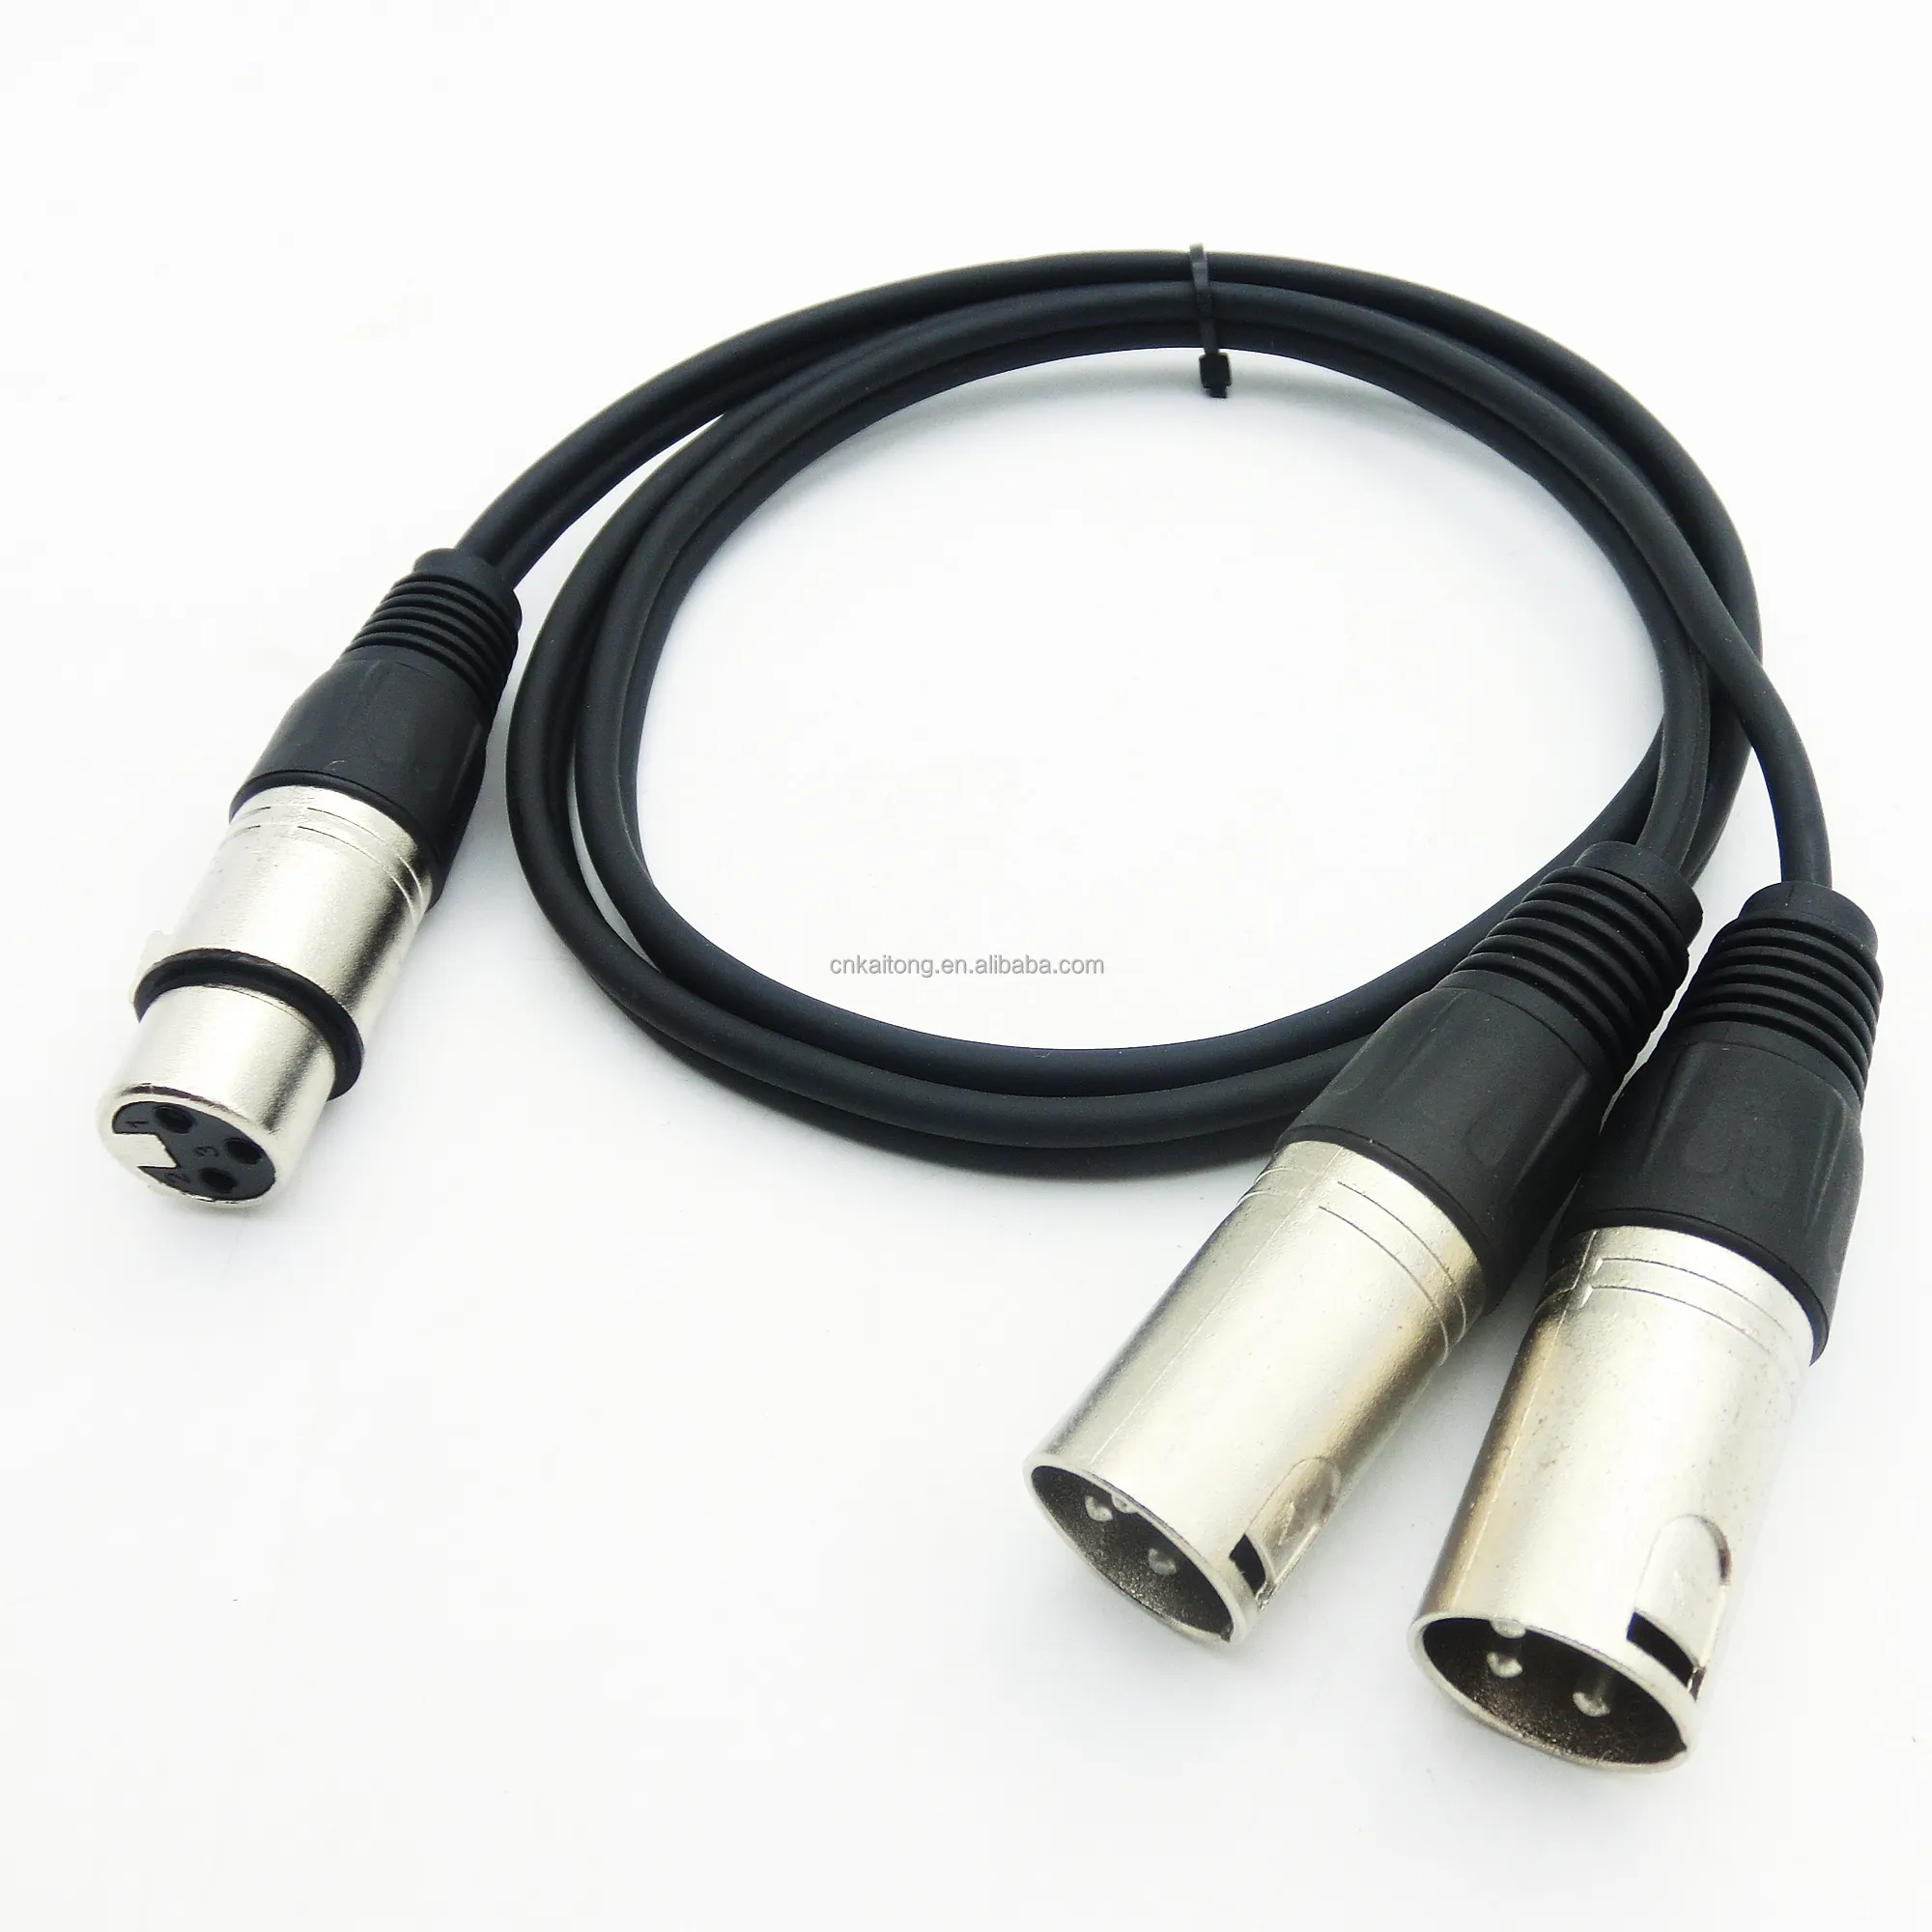 Manufacturer Y xlr Cable Cords Splitter Cable Turnaround DMX Mixing Board mic audio cable 3 Pin Female to Dual 3 Pin Male XLR